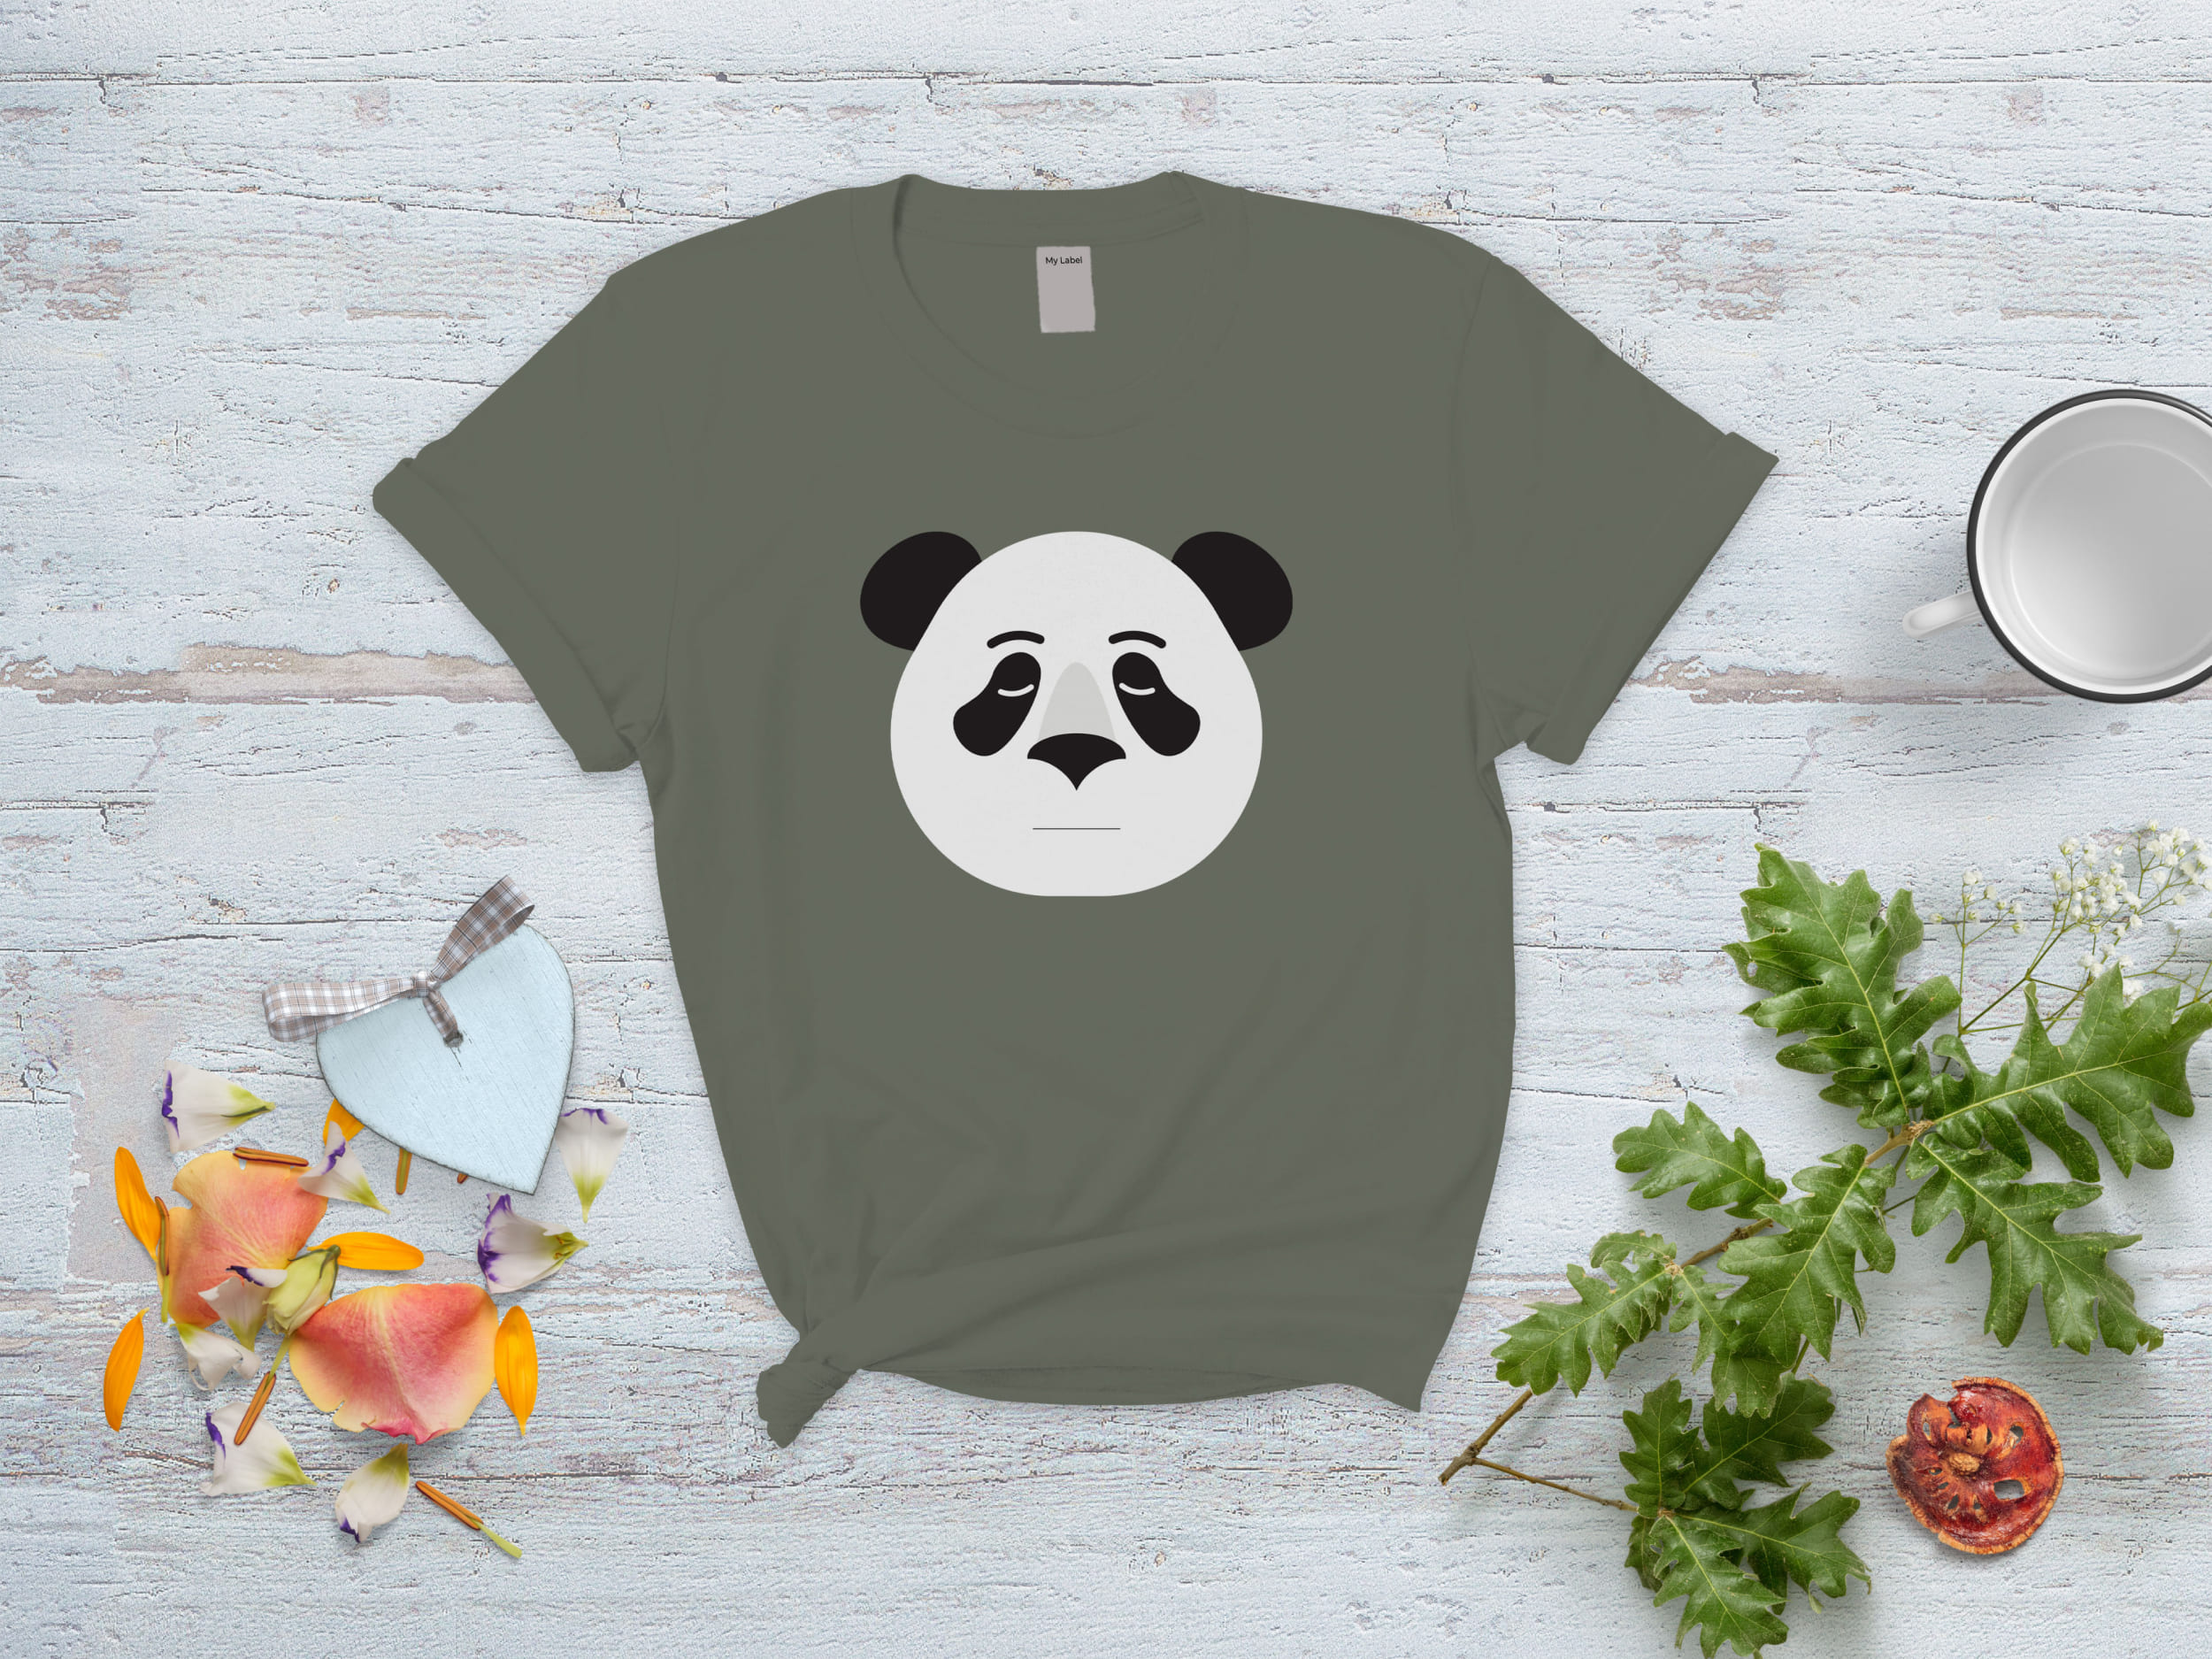 Gray t-shirt with a panda offended face on a gray and white background with various objects.